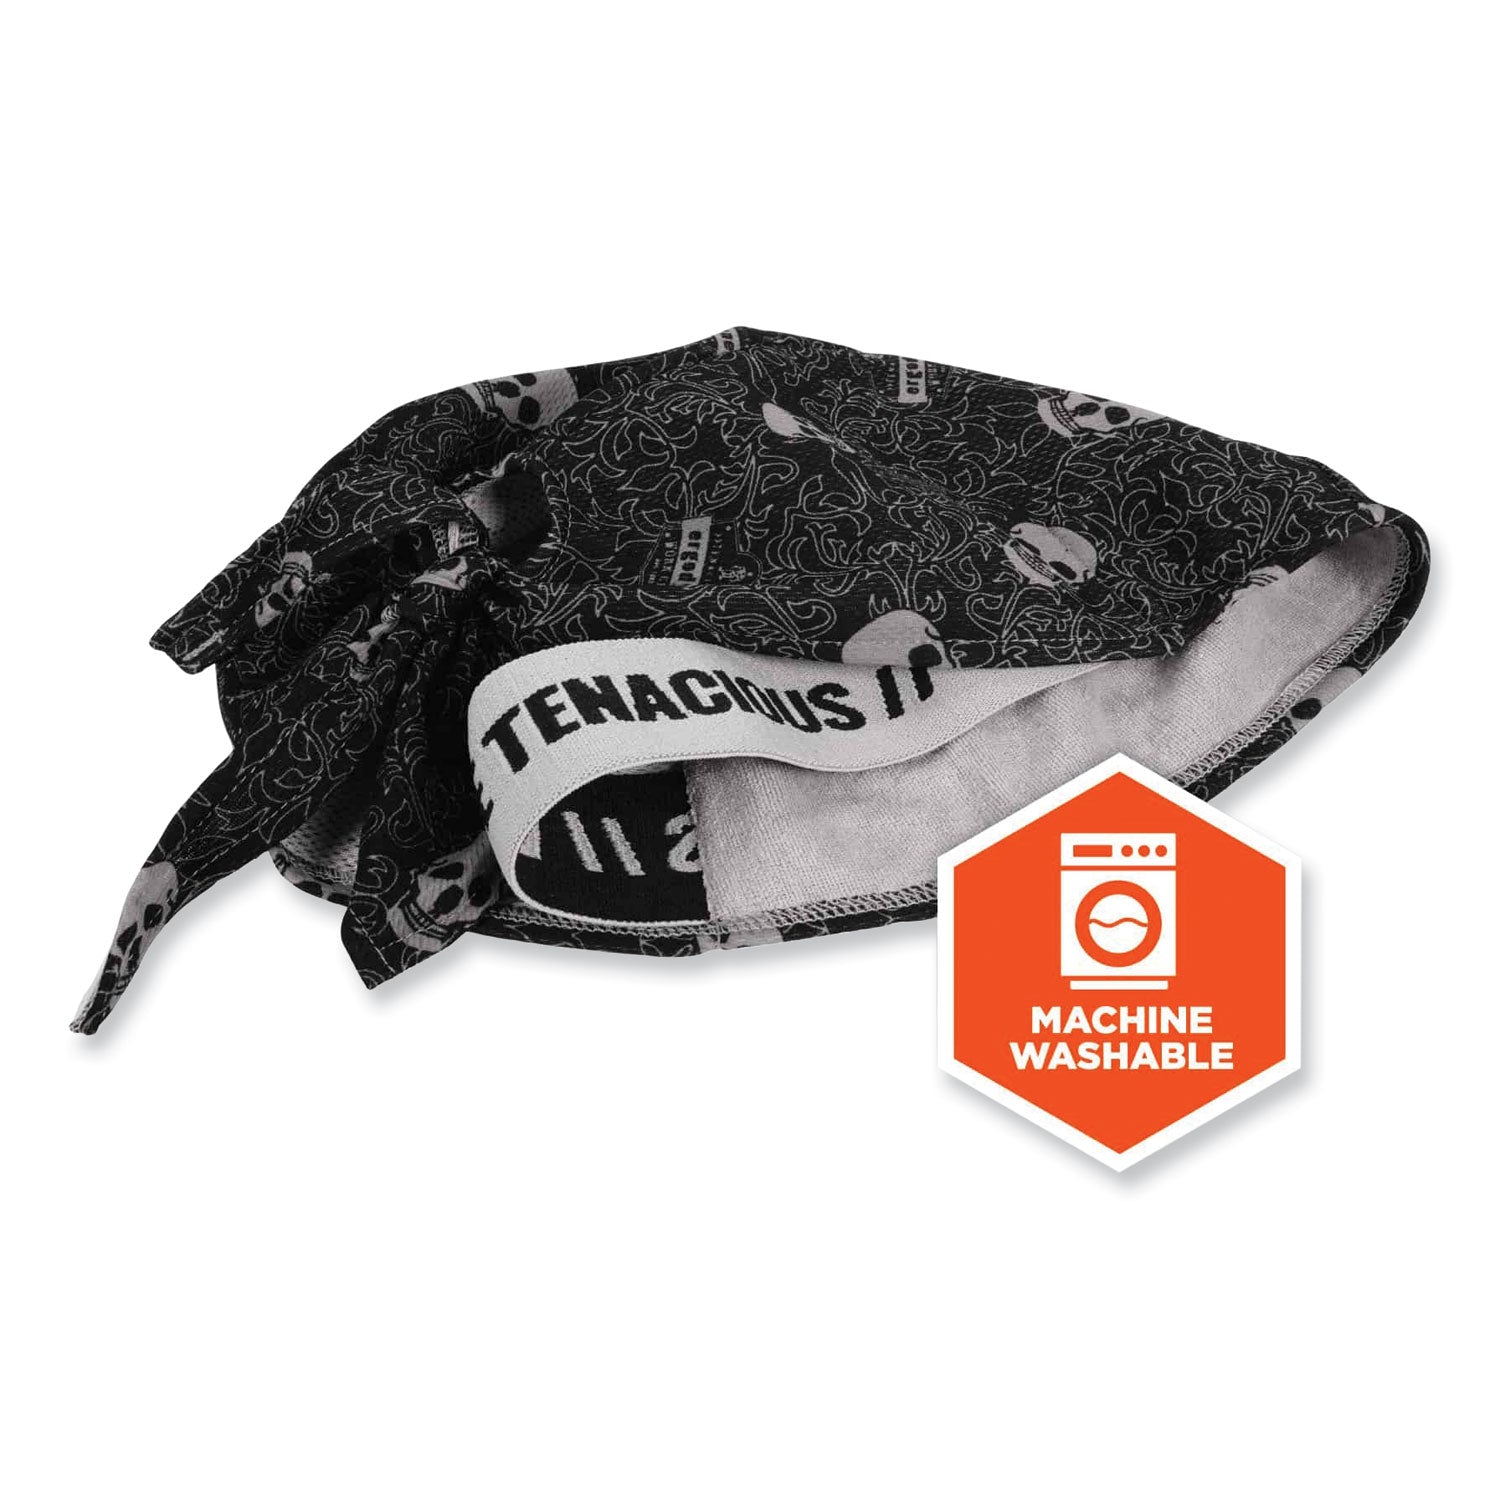 chill-its-6615-high-performance-bandana-doo-rag-with-terry-cloth-sweatband-one-size-skulls-ships-in-1-3-business-days_ego12519 - 6